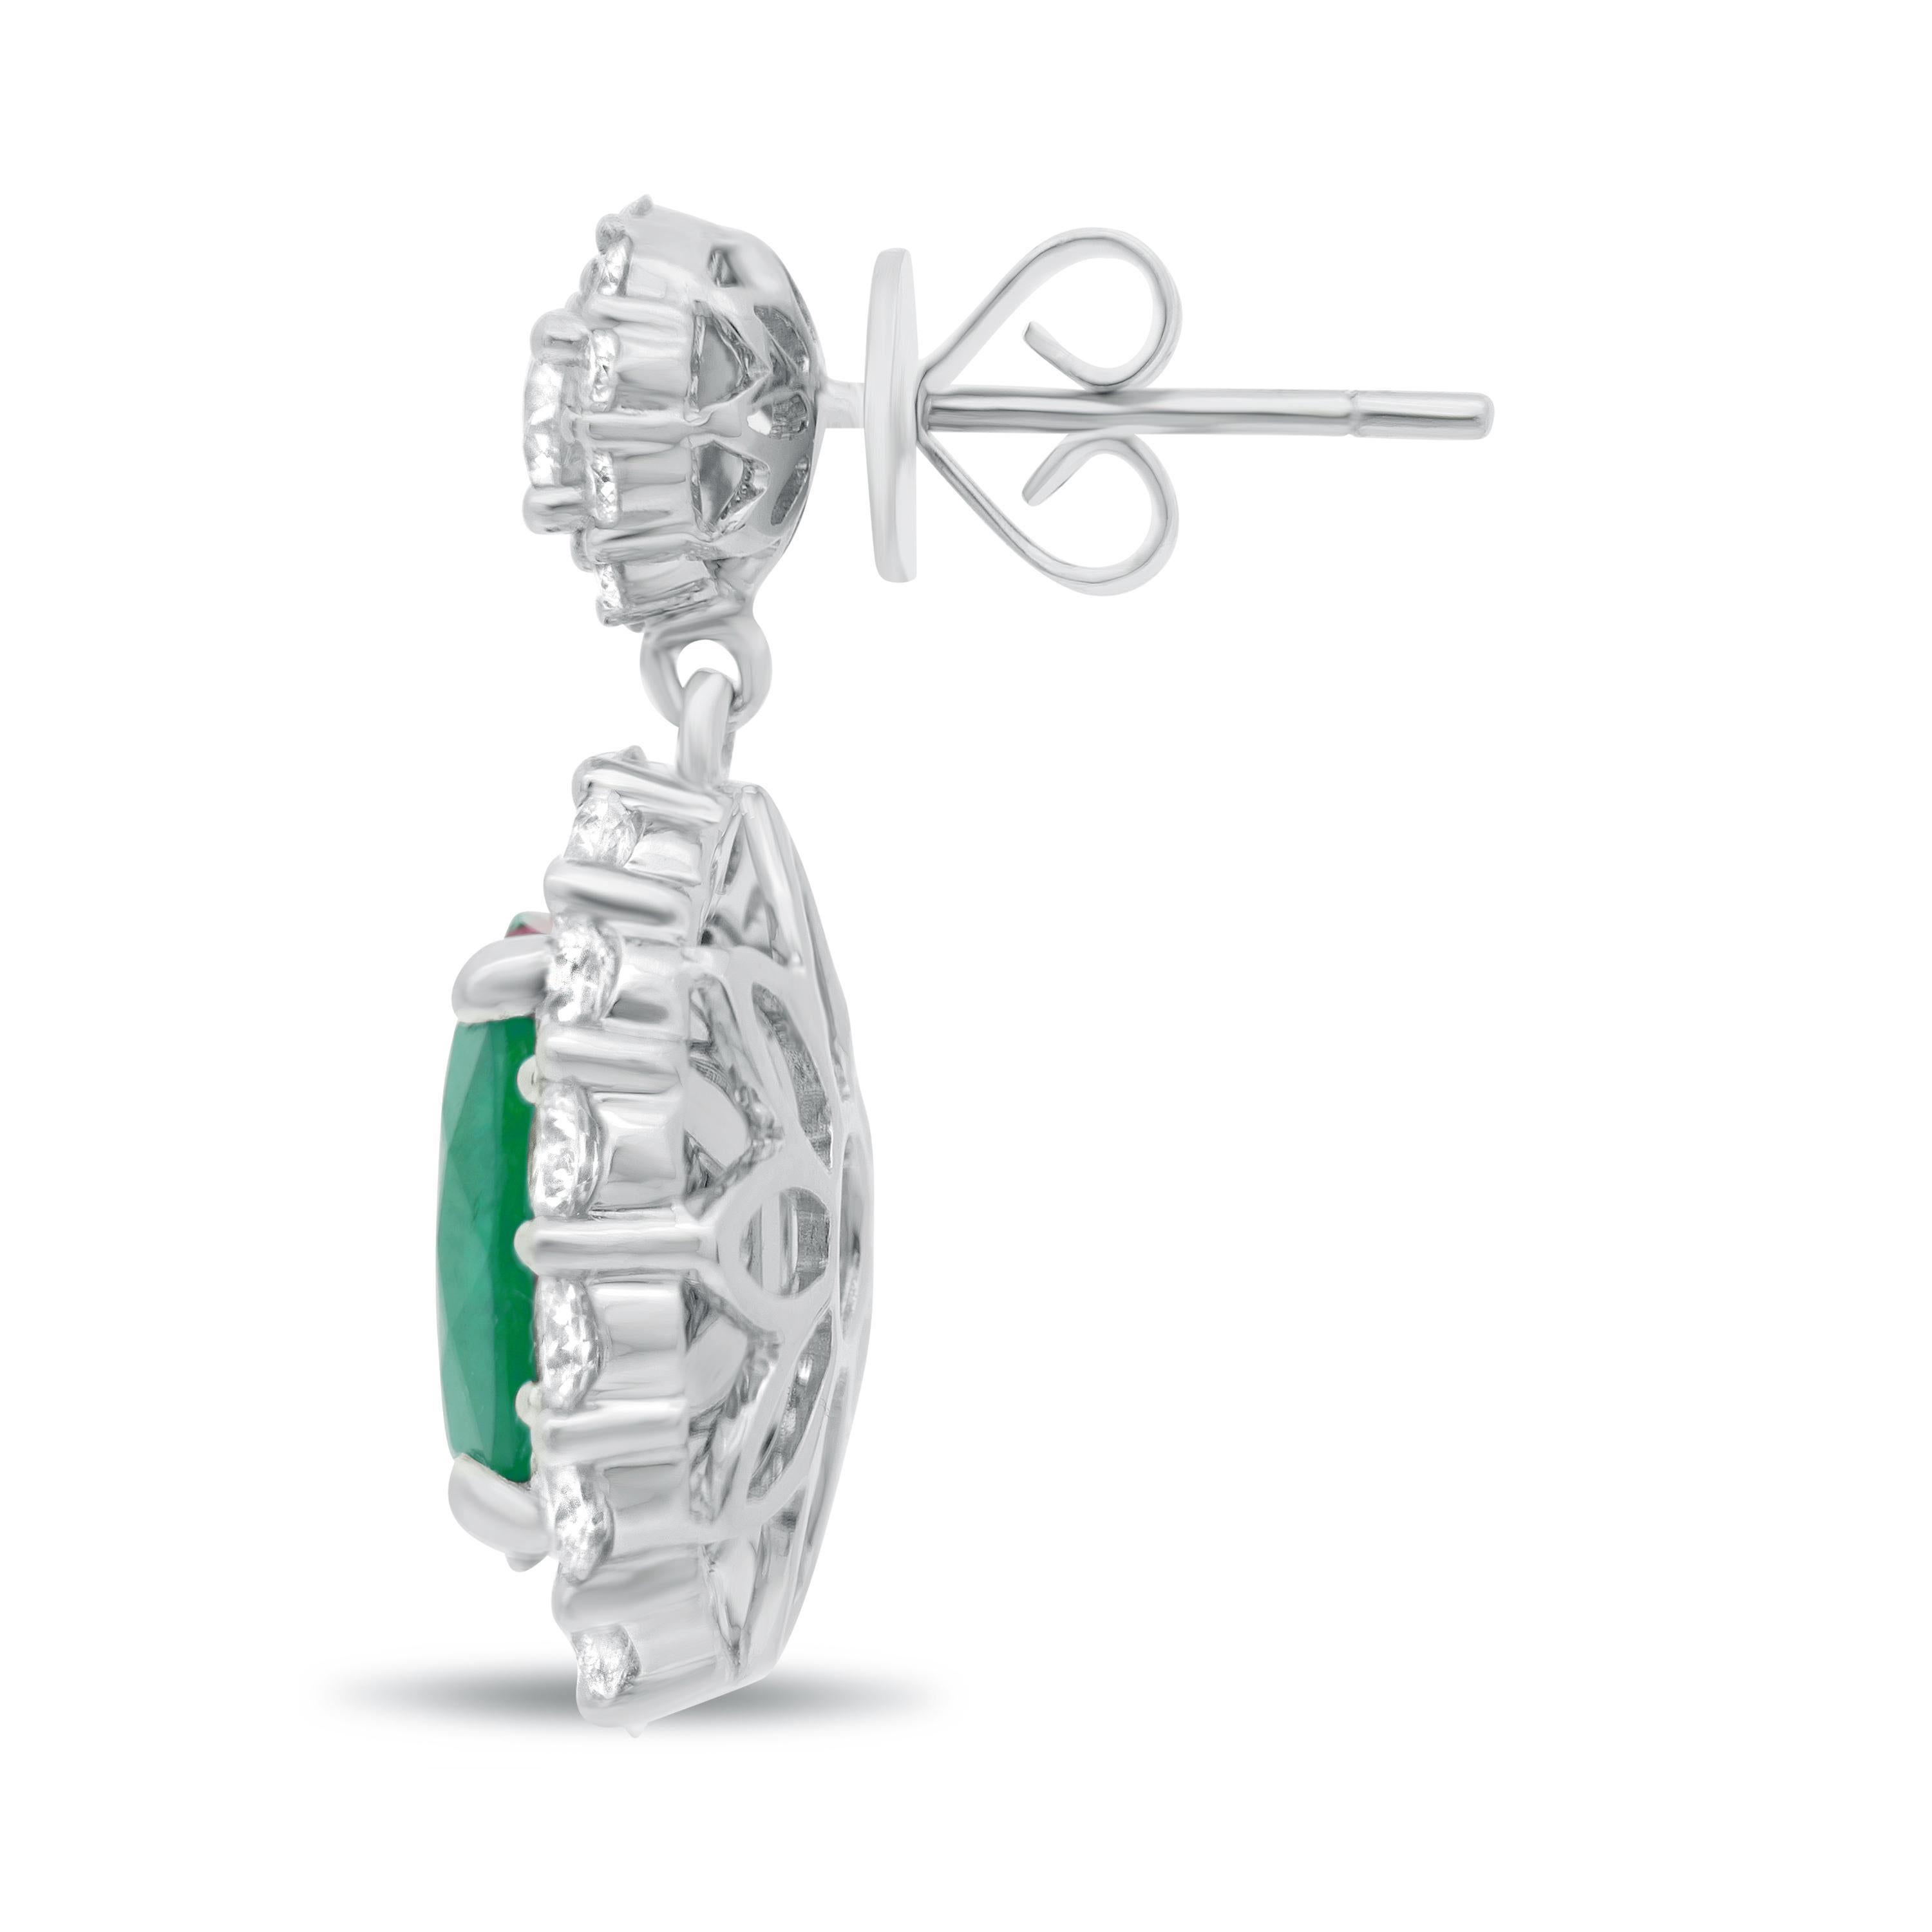 Oval Cut 2.19 Carat Total Weight Emerald and Diamond Earrings Set in 18 Karat White Gold For Sale